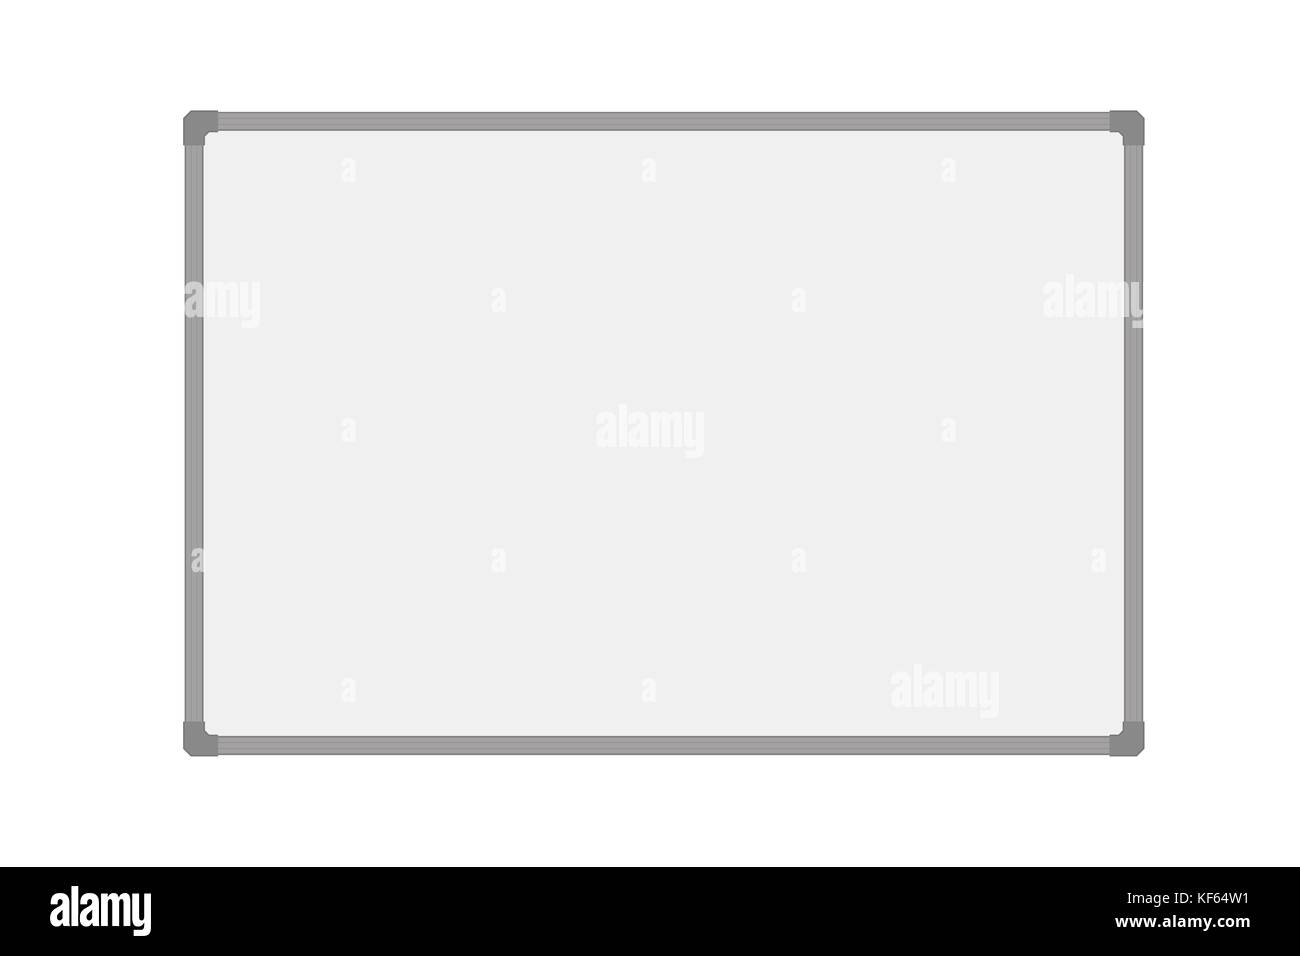 Realistic vector illustration of empty whiteboard with aluminum frame, isolated on white background Stock Vector